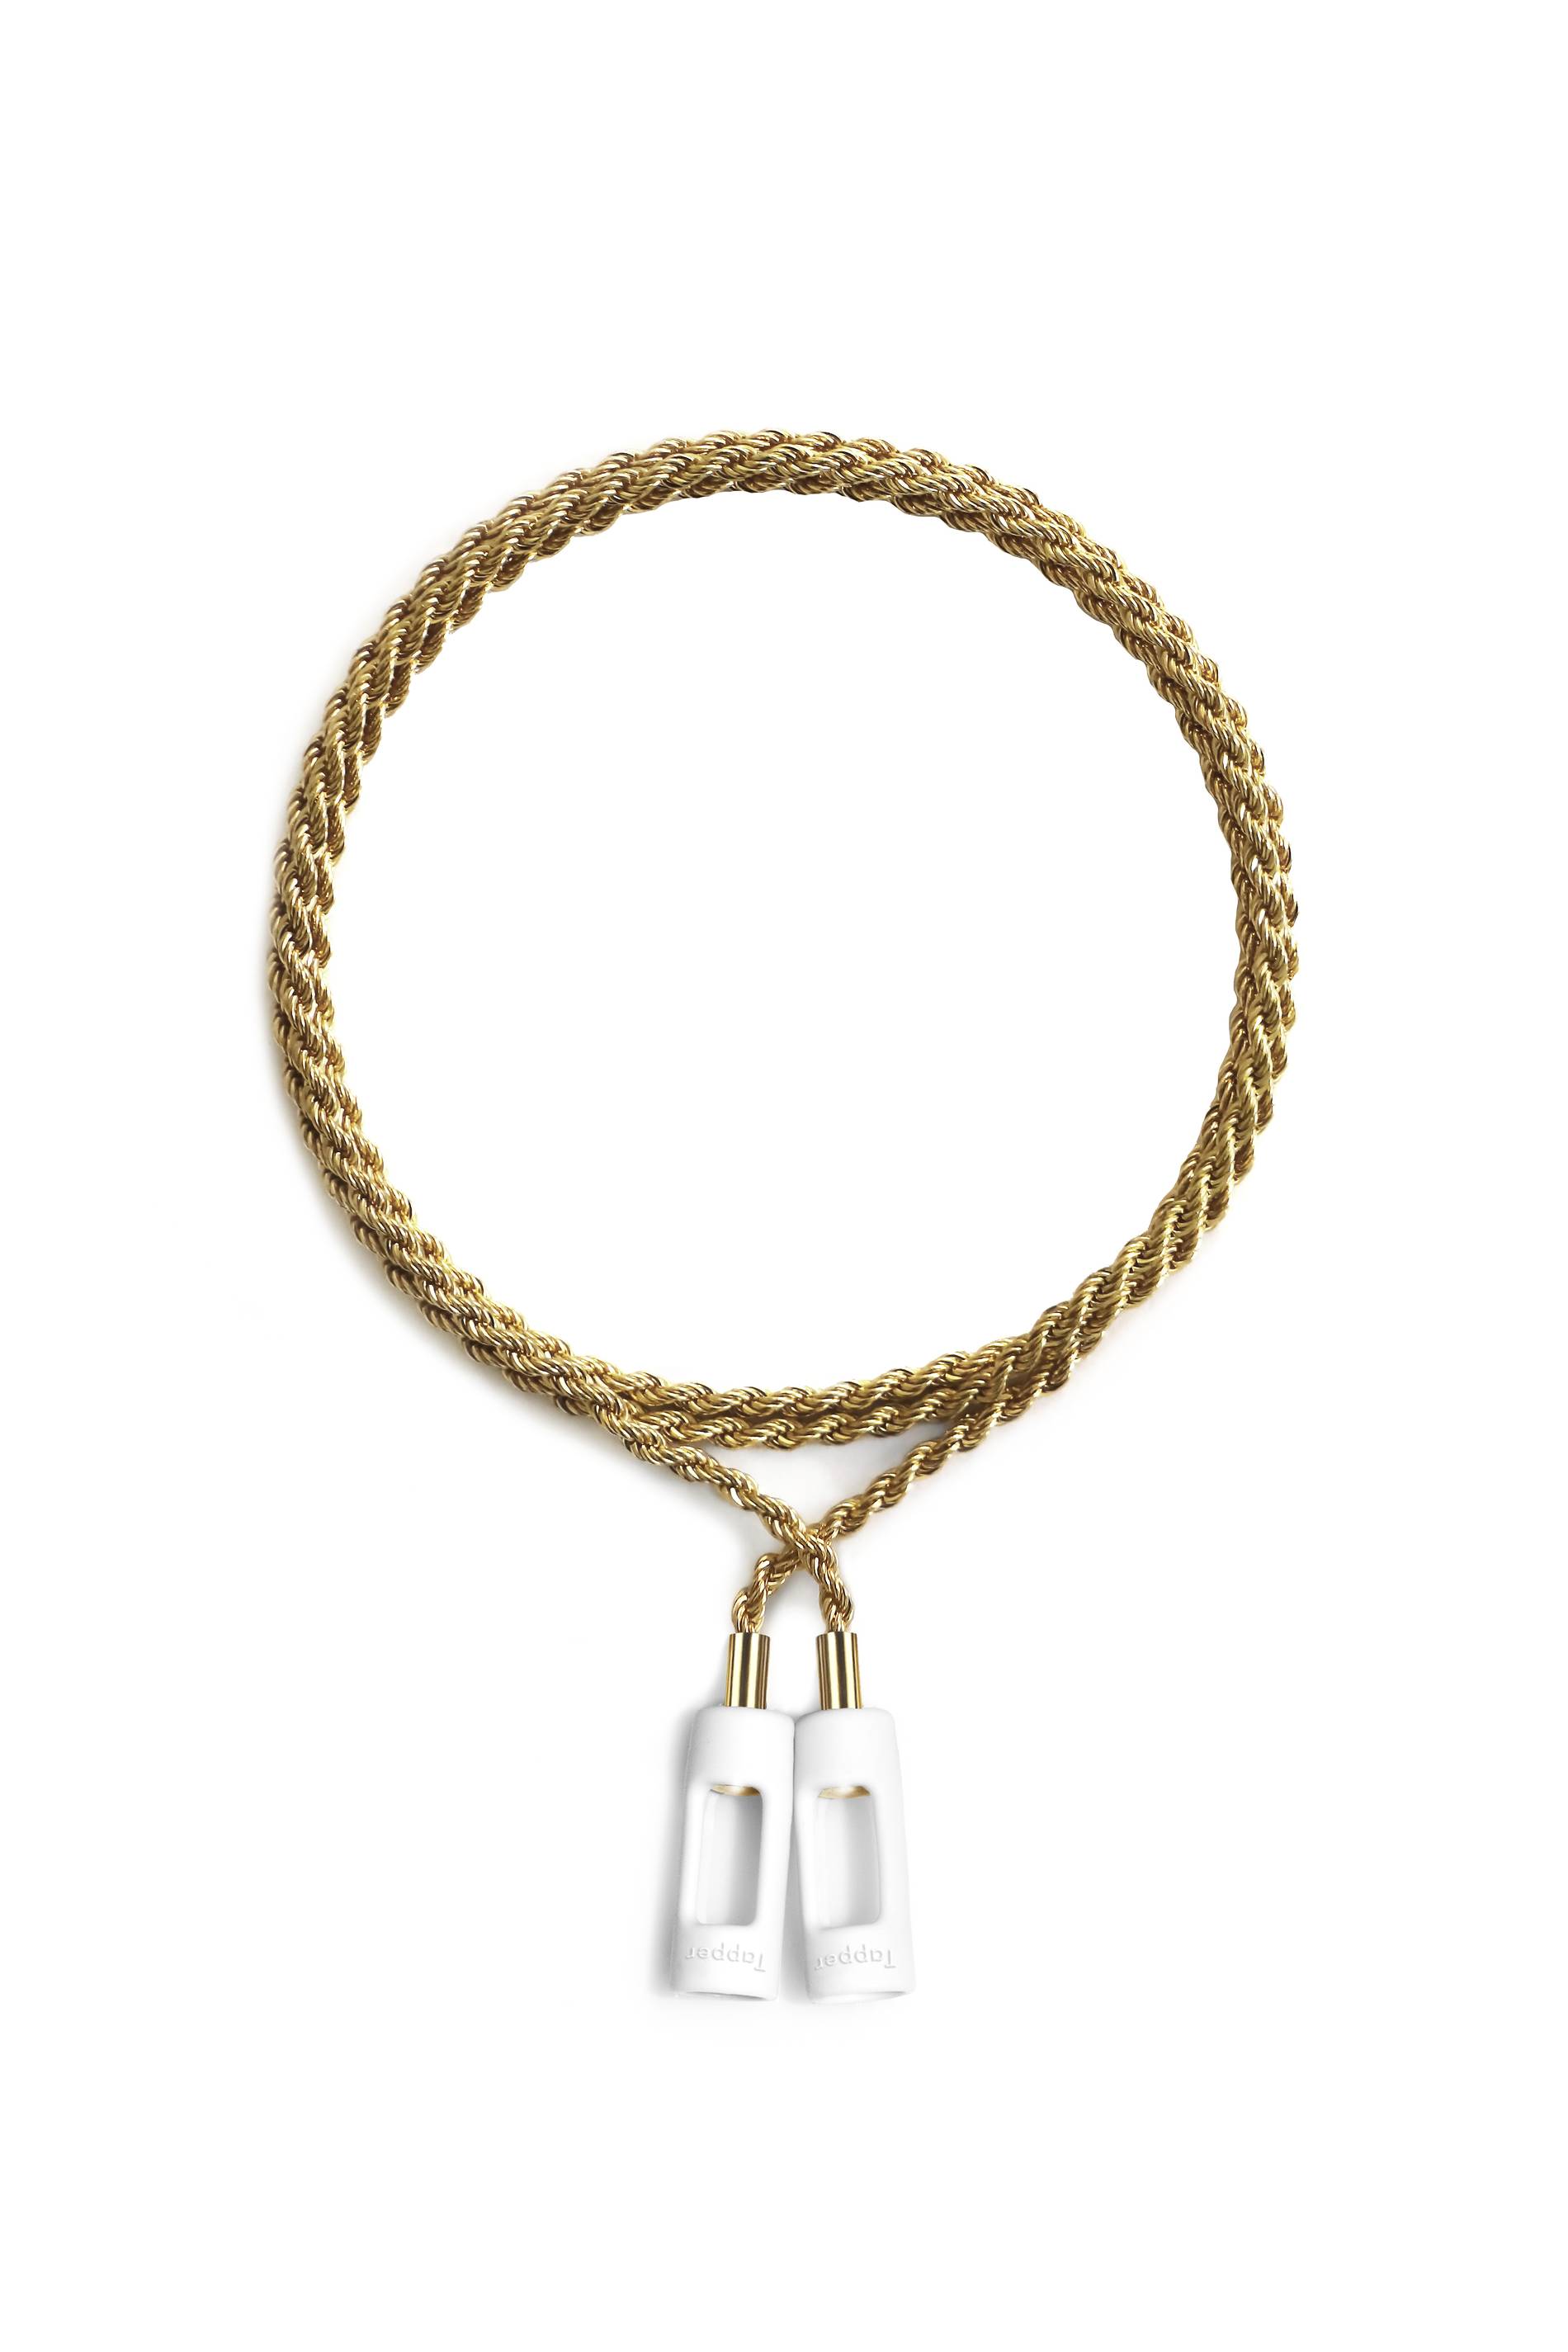 Tapper Gold Rope Chain for Earbuds